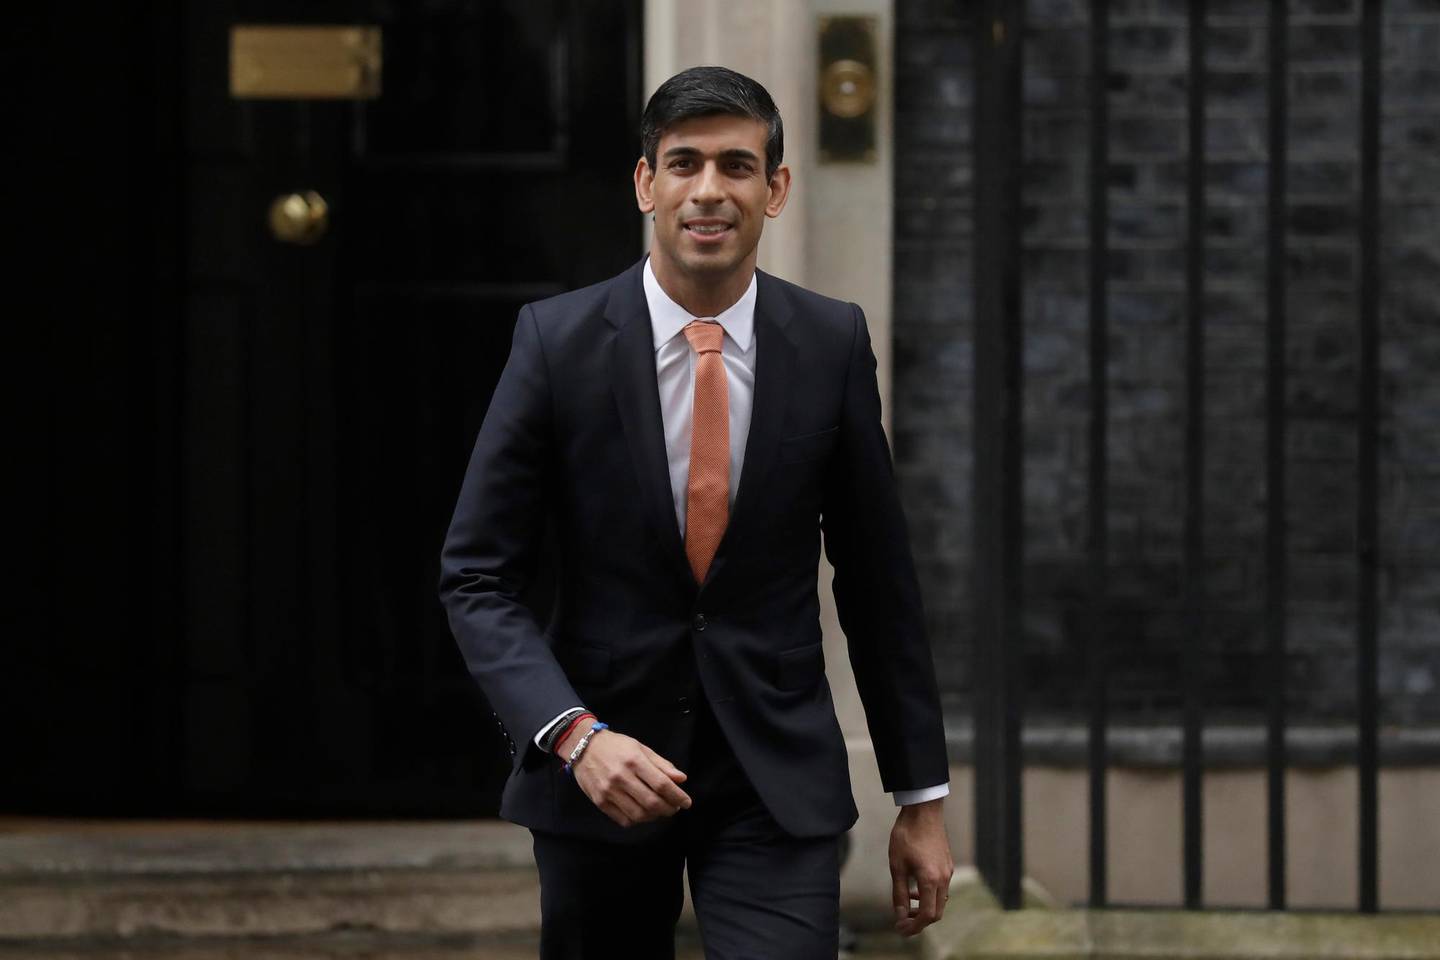 British lawmaker Rishi Sunak, and Chancellor of the Exchequer leaves 10 Downing Street, where he was given the job by Britain's Prime Minister Boris Johnson, as the former Chancellor Sajid Javid, resigned, in London, Thursday, Feb. 13, 2020. British Prime Minister Boris Johnson shook up his government on Thursday, firing and appointing ministers to key Cabinet posts. Johnson was aiming to tighten his grip on government after winning a big parliamentary majority in December's election. That victory allowed Johnson to take Britain out of the European Union in January. (AP Photo/Matt Dunham)